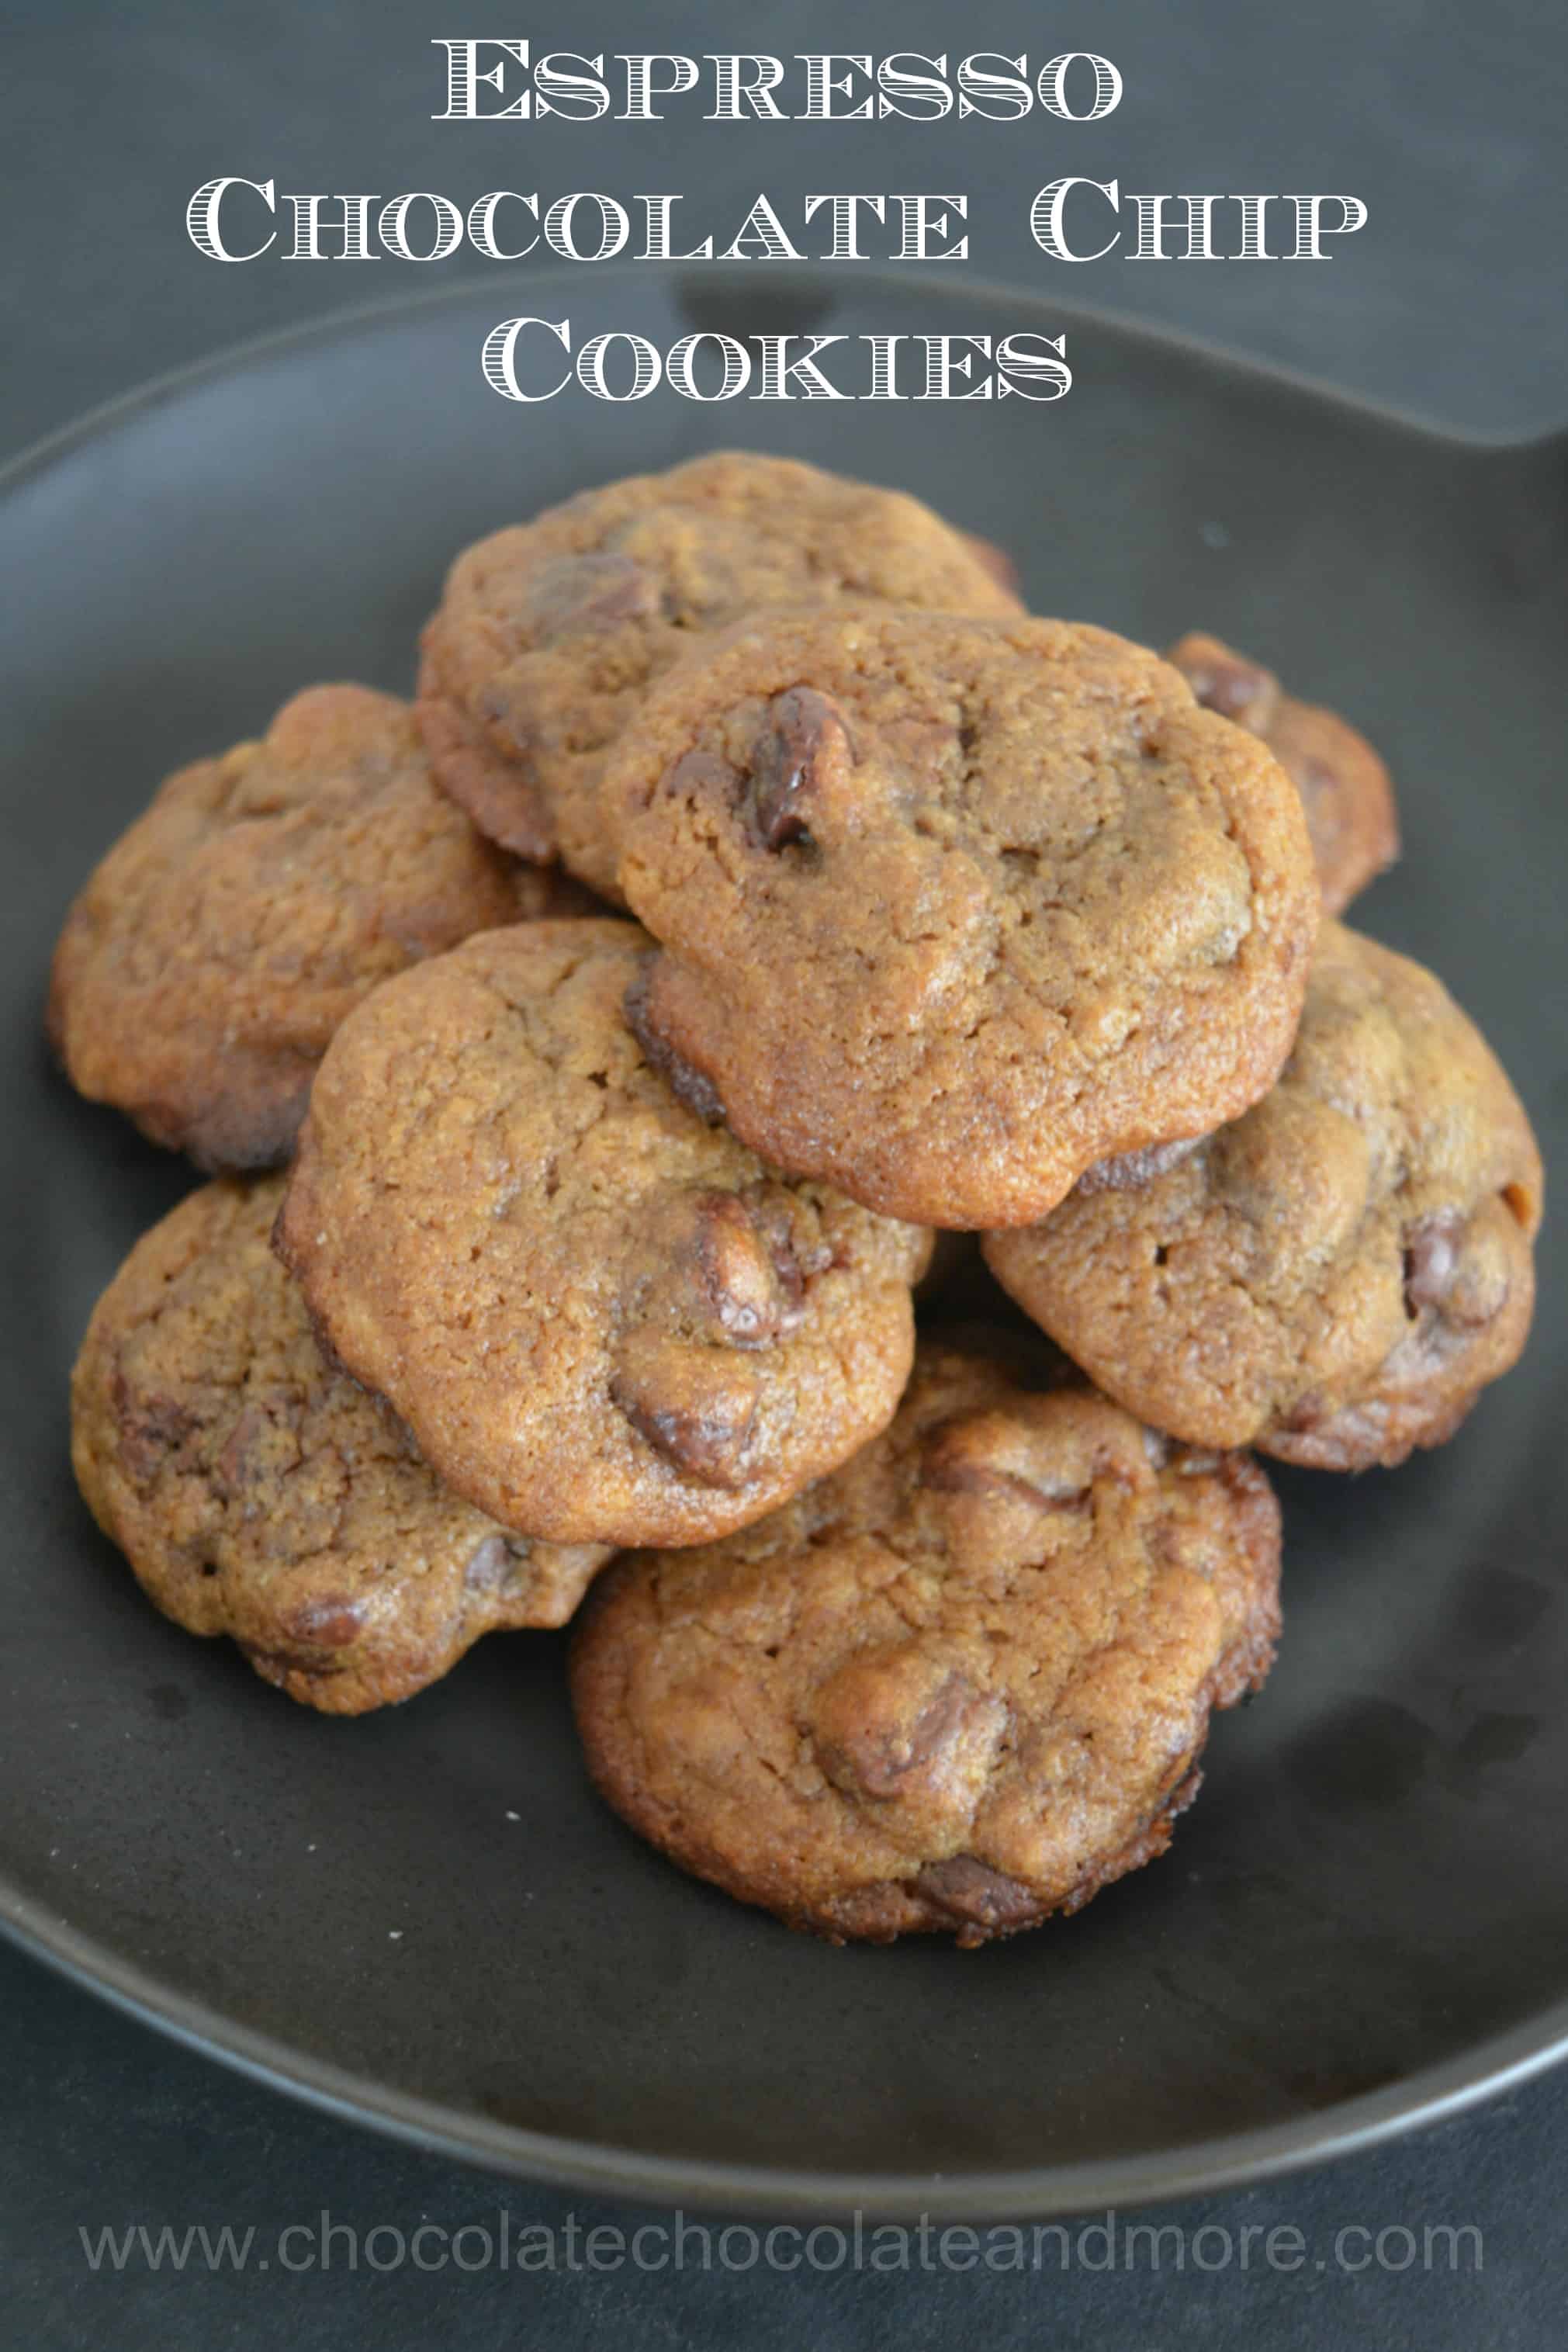 Espresso Chocolate Chip Cookies Chocolate Chocolate And More